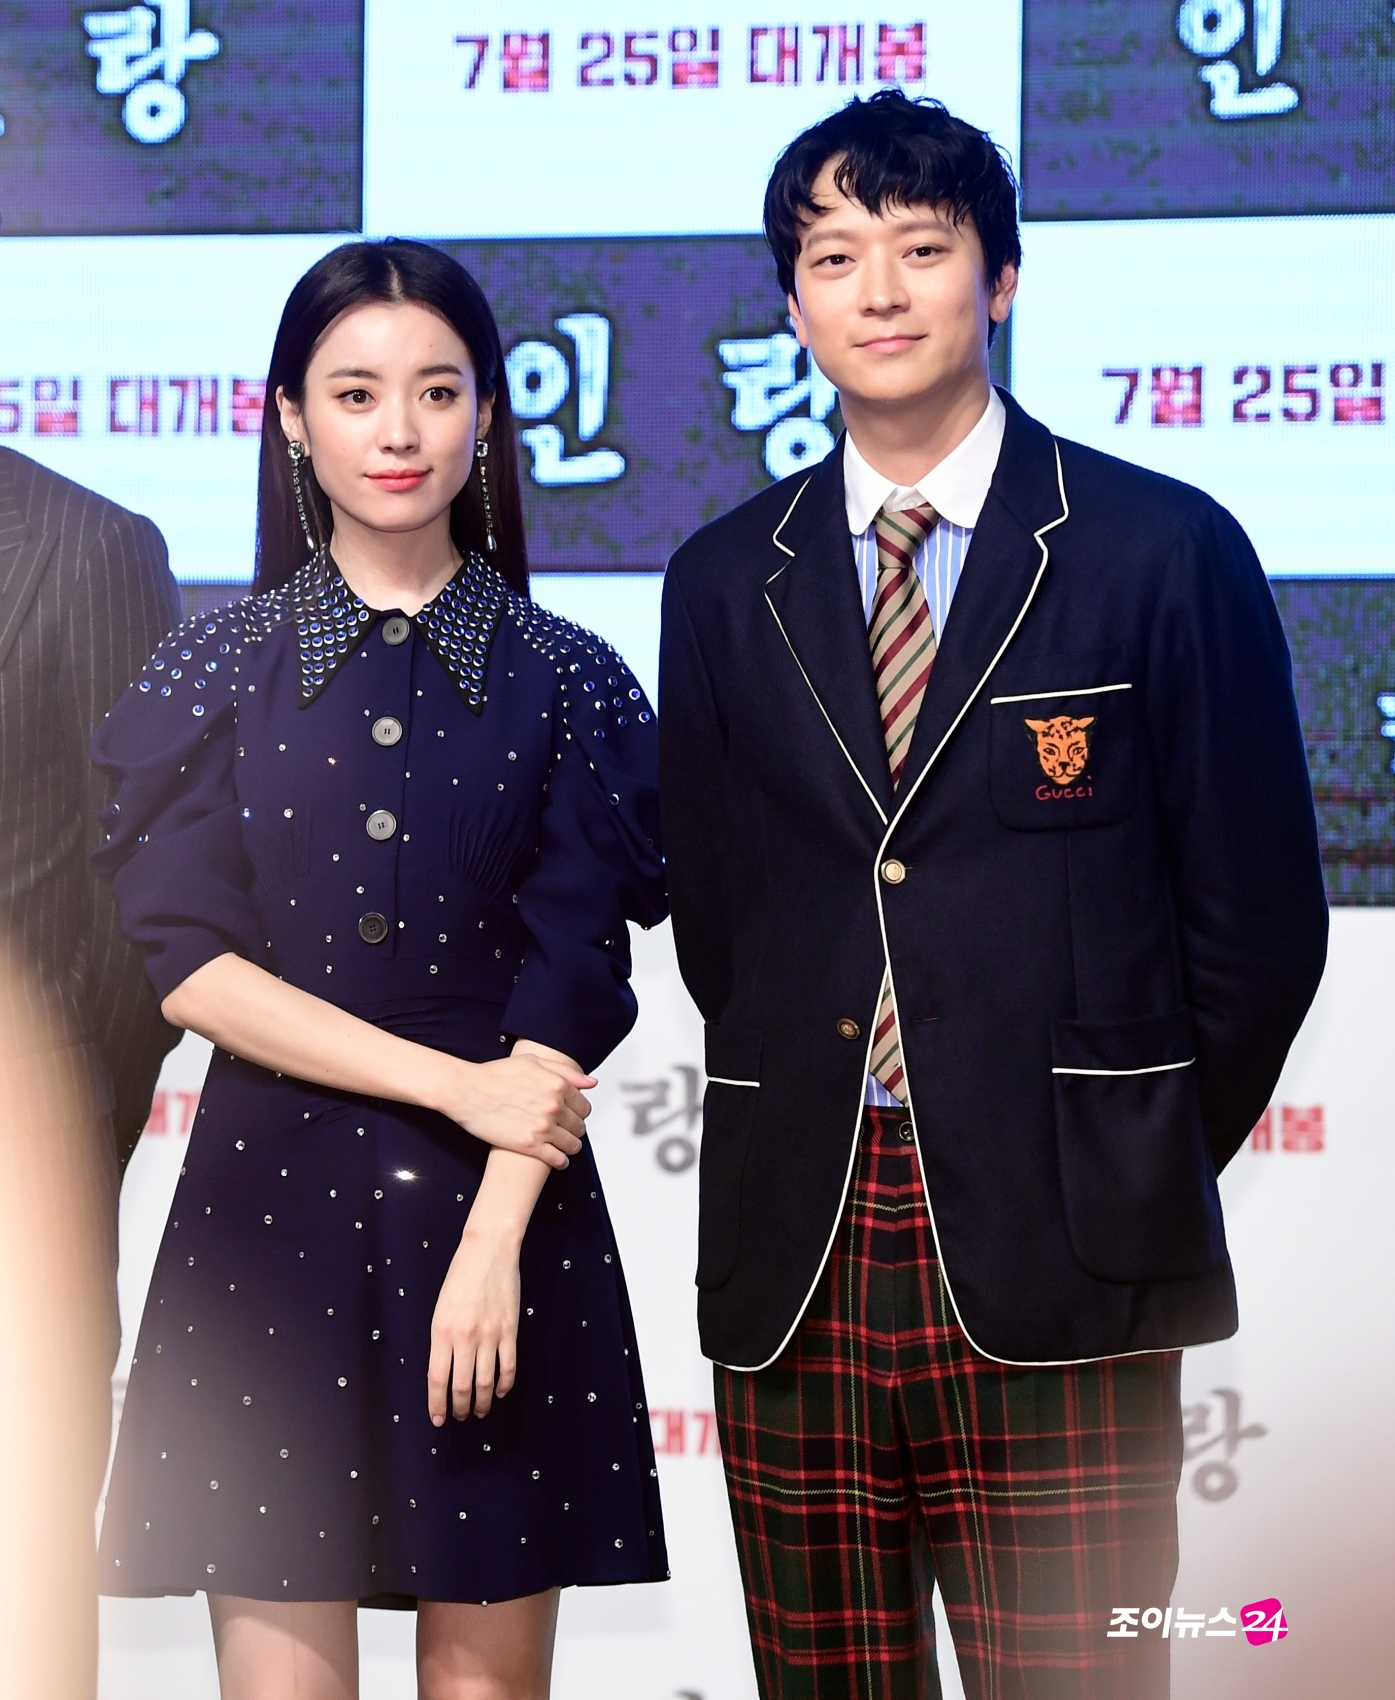 Actors Han Hyo-joo and Gang Dong-Won attend the red carpet event for the movie Illang: The Wolf Brigade (director Kim Ji-woon) at Times Square in Yeongdeungpo-gu, Seoul on the afternoon of the 18th.The film Illang: The Wolf Brigade depicts the performance of the human weapon Illang: The Wolf Brigade, called the breathtaking confrontation between the police organization Special Forces and the absolute power agency centered on the intelligence agency Public Security Department in 2029, when anti-unification terrorist groups emerged after the two Koreas declared a five-year plan to prepare for unification.Actors Gang Dong-Won, Han Hyo-joo, Jung Woo-sung, Kim Moo Yeol, Han Yeri and Choi Min Ho will appear on the 25th.